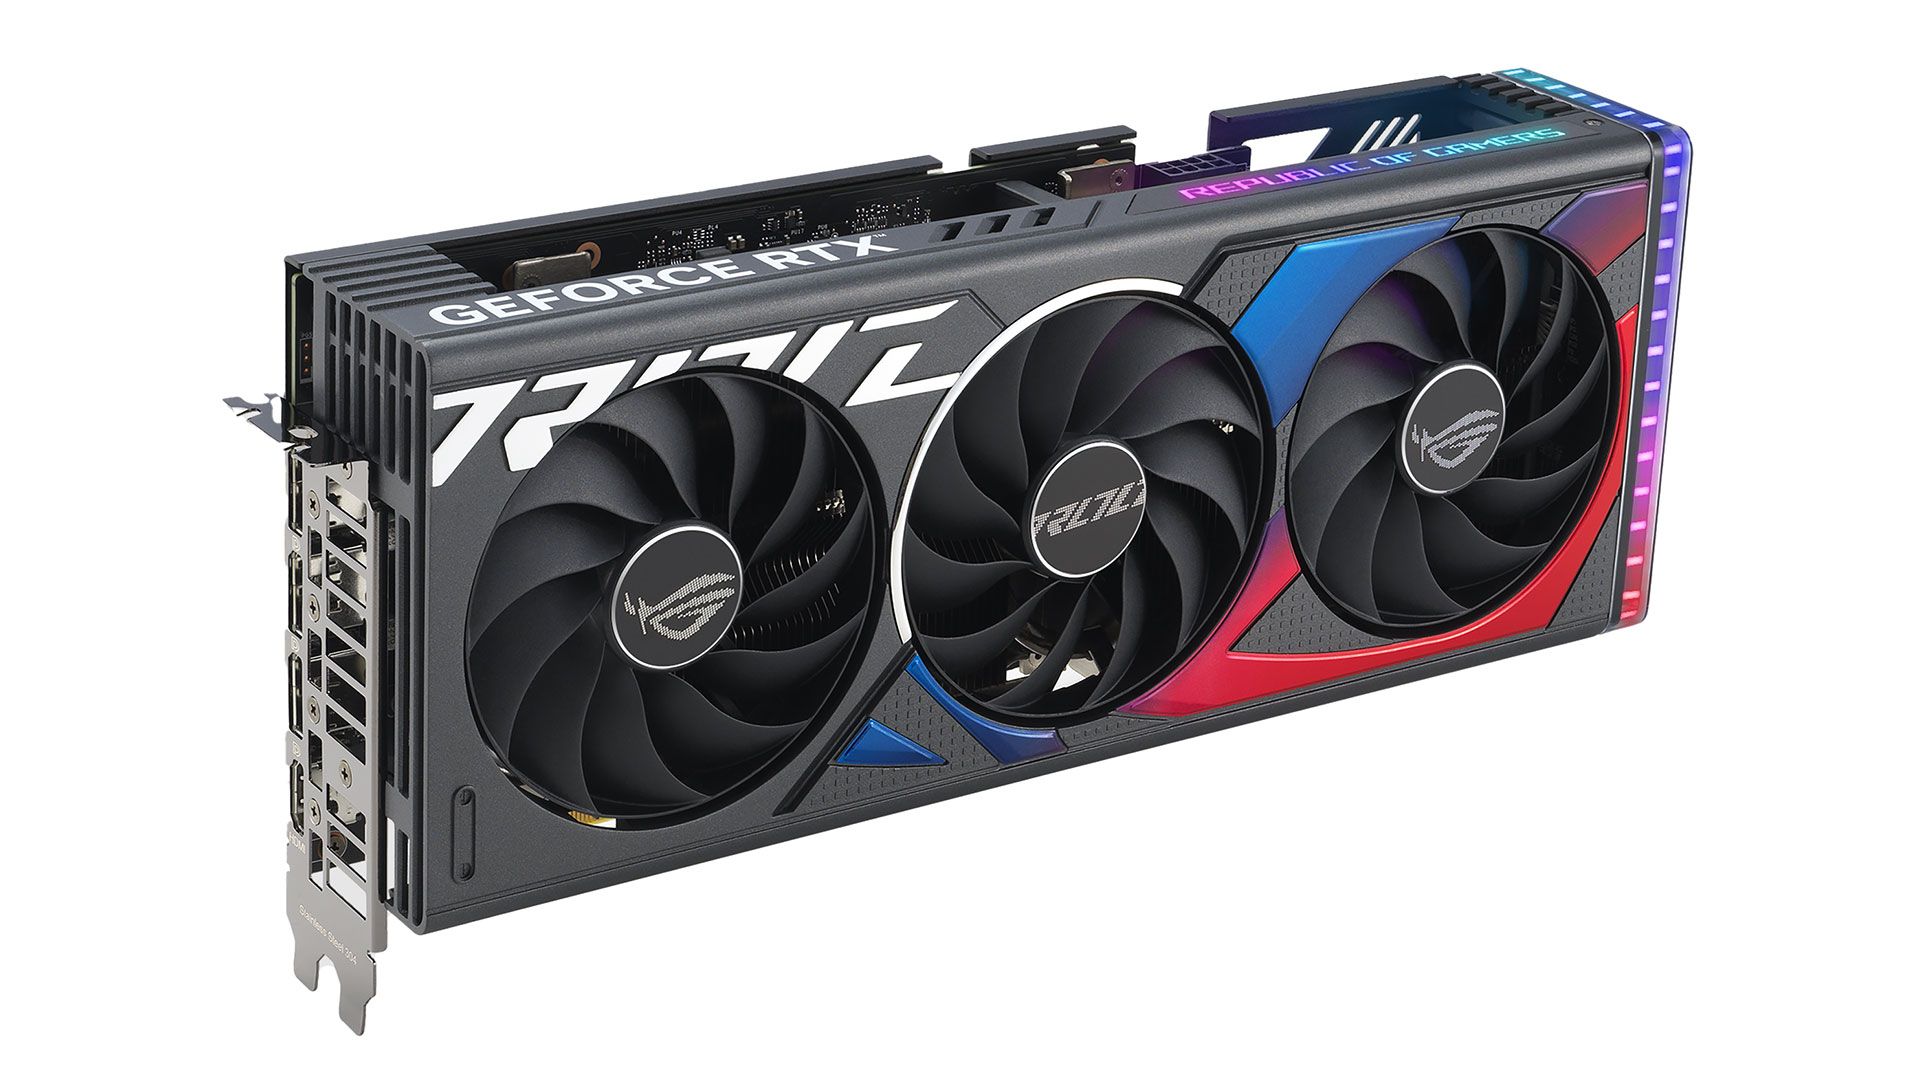 The RTX 4060 Ti 16GB tests a little slower than the 8GB version